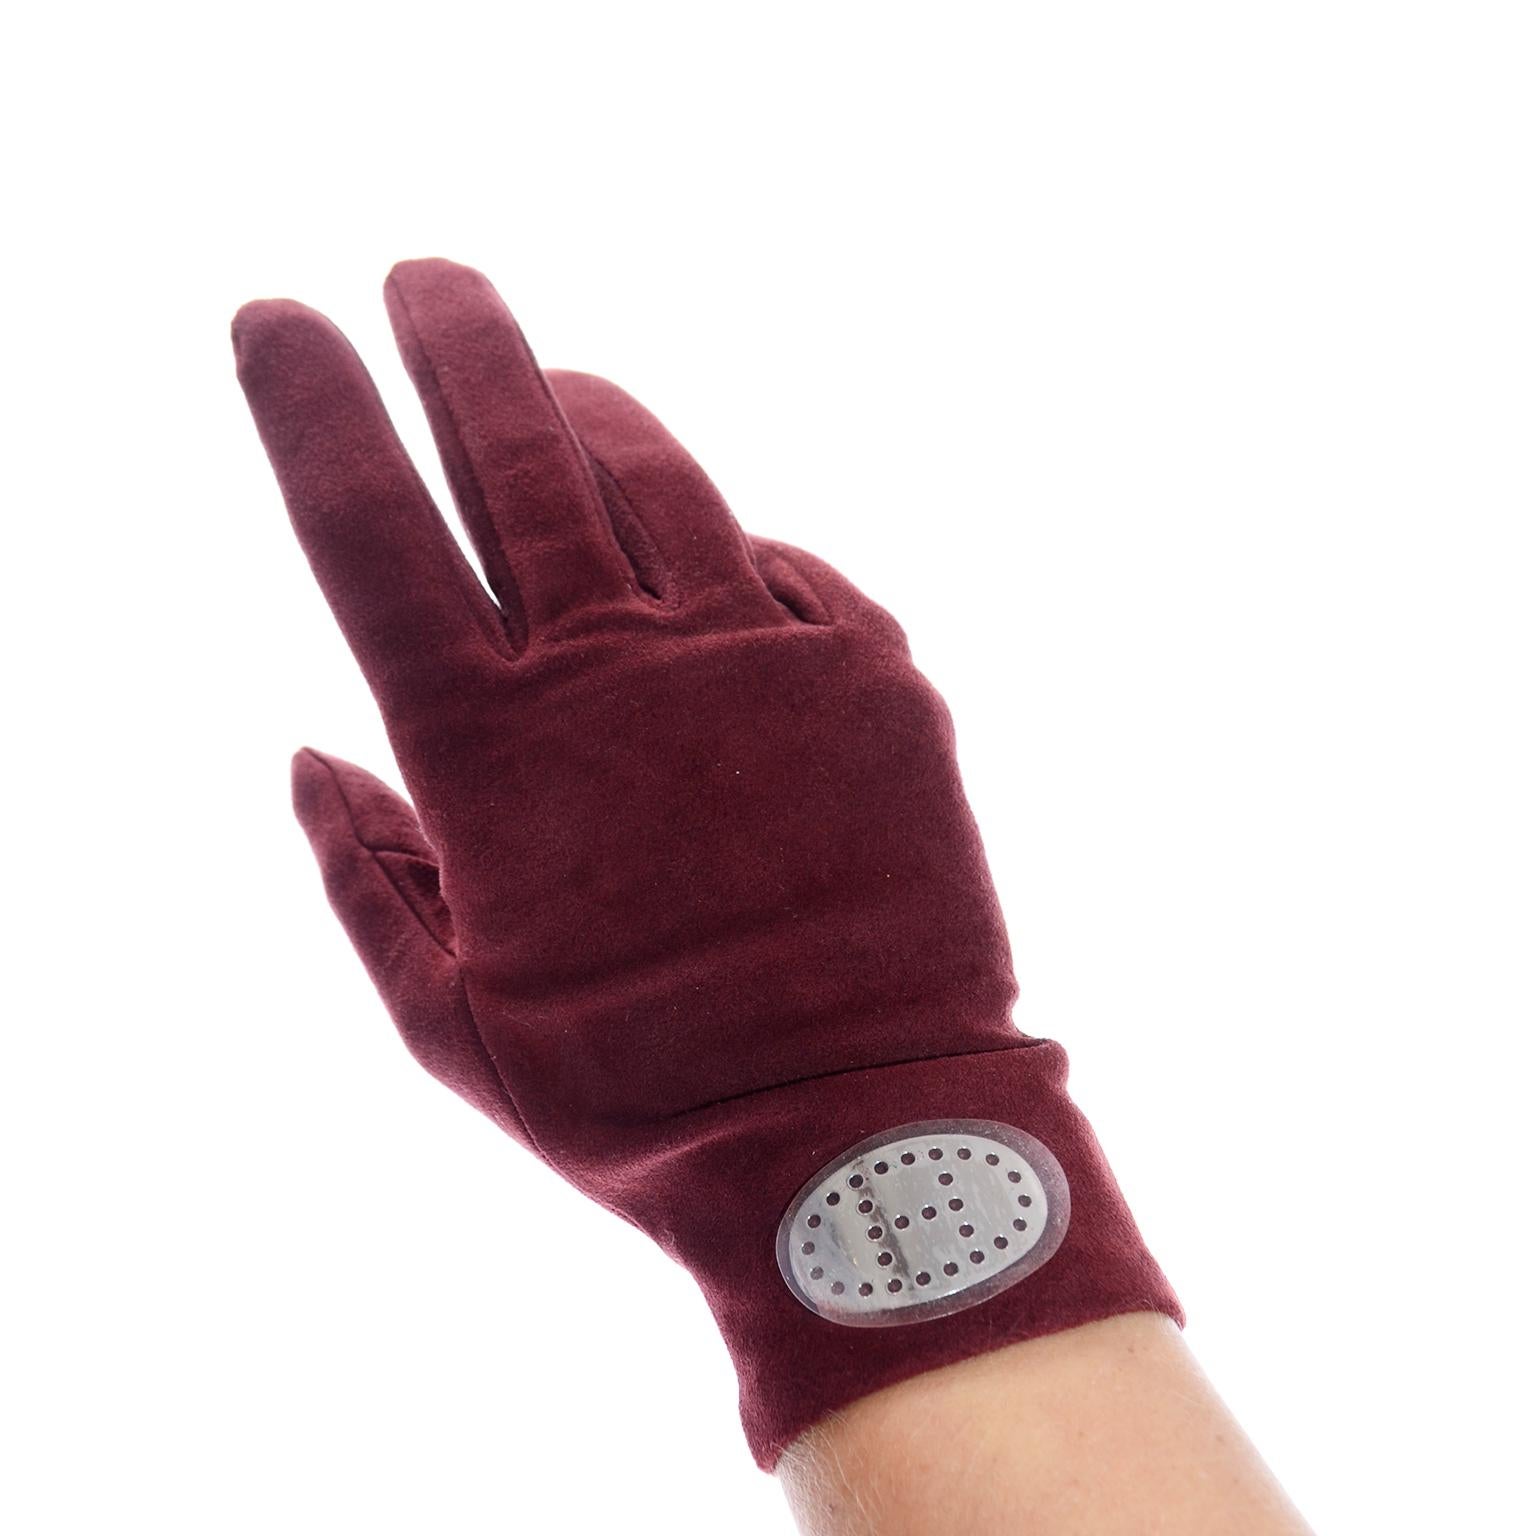 These are burgundy red reindeer leather gloves designed by Hermés. They have a silver plate at the top of the wrist that is silver with a pierced H in the center. The plates still have the plastic film protecting the silver and the gloves were never